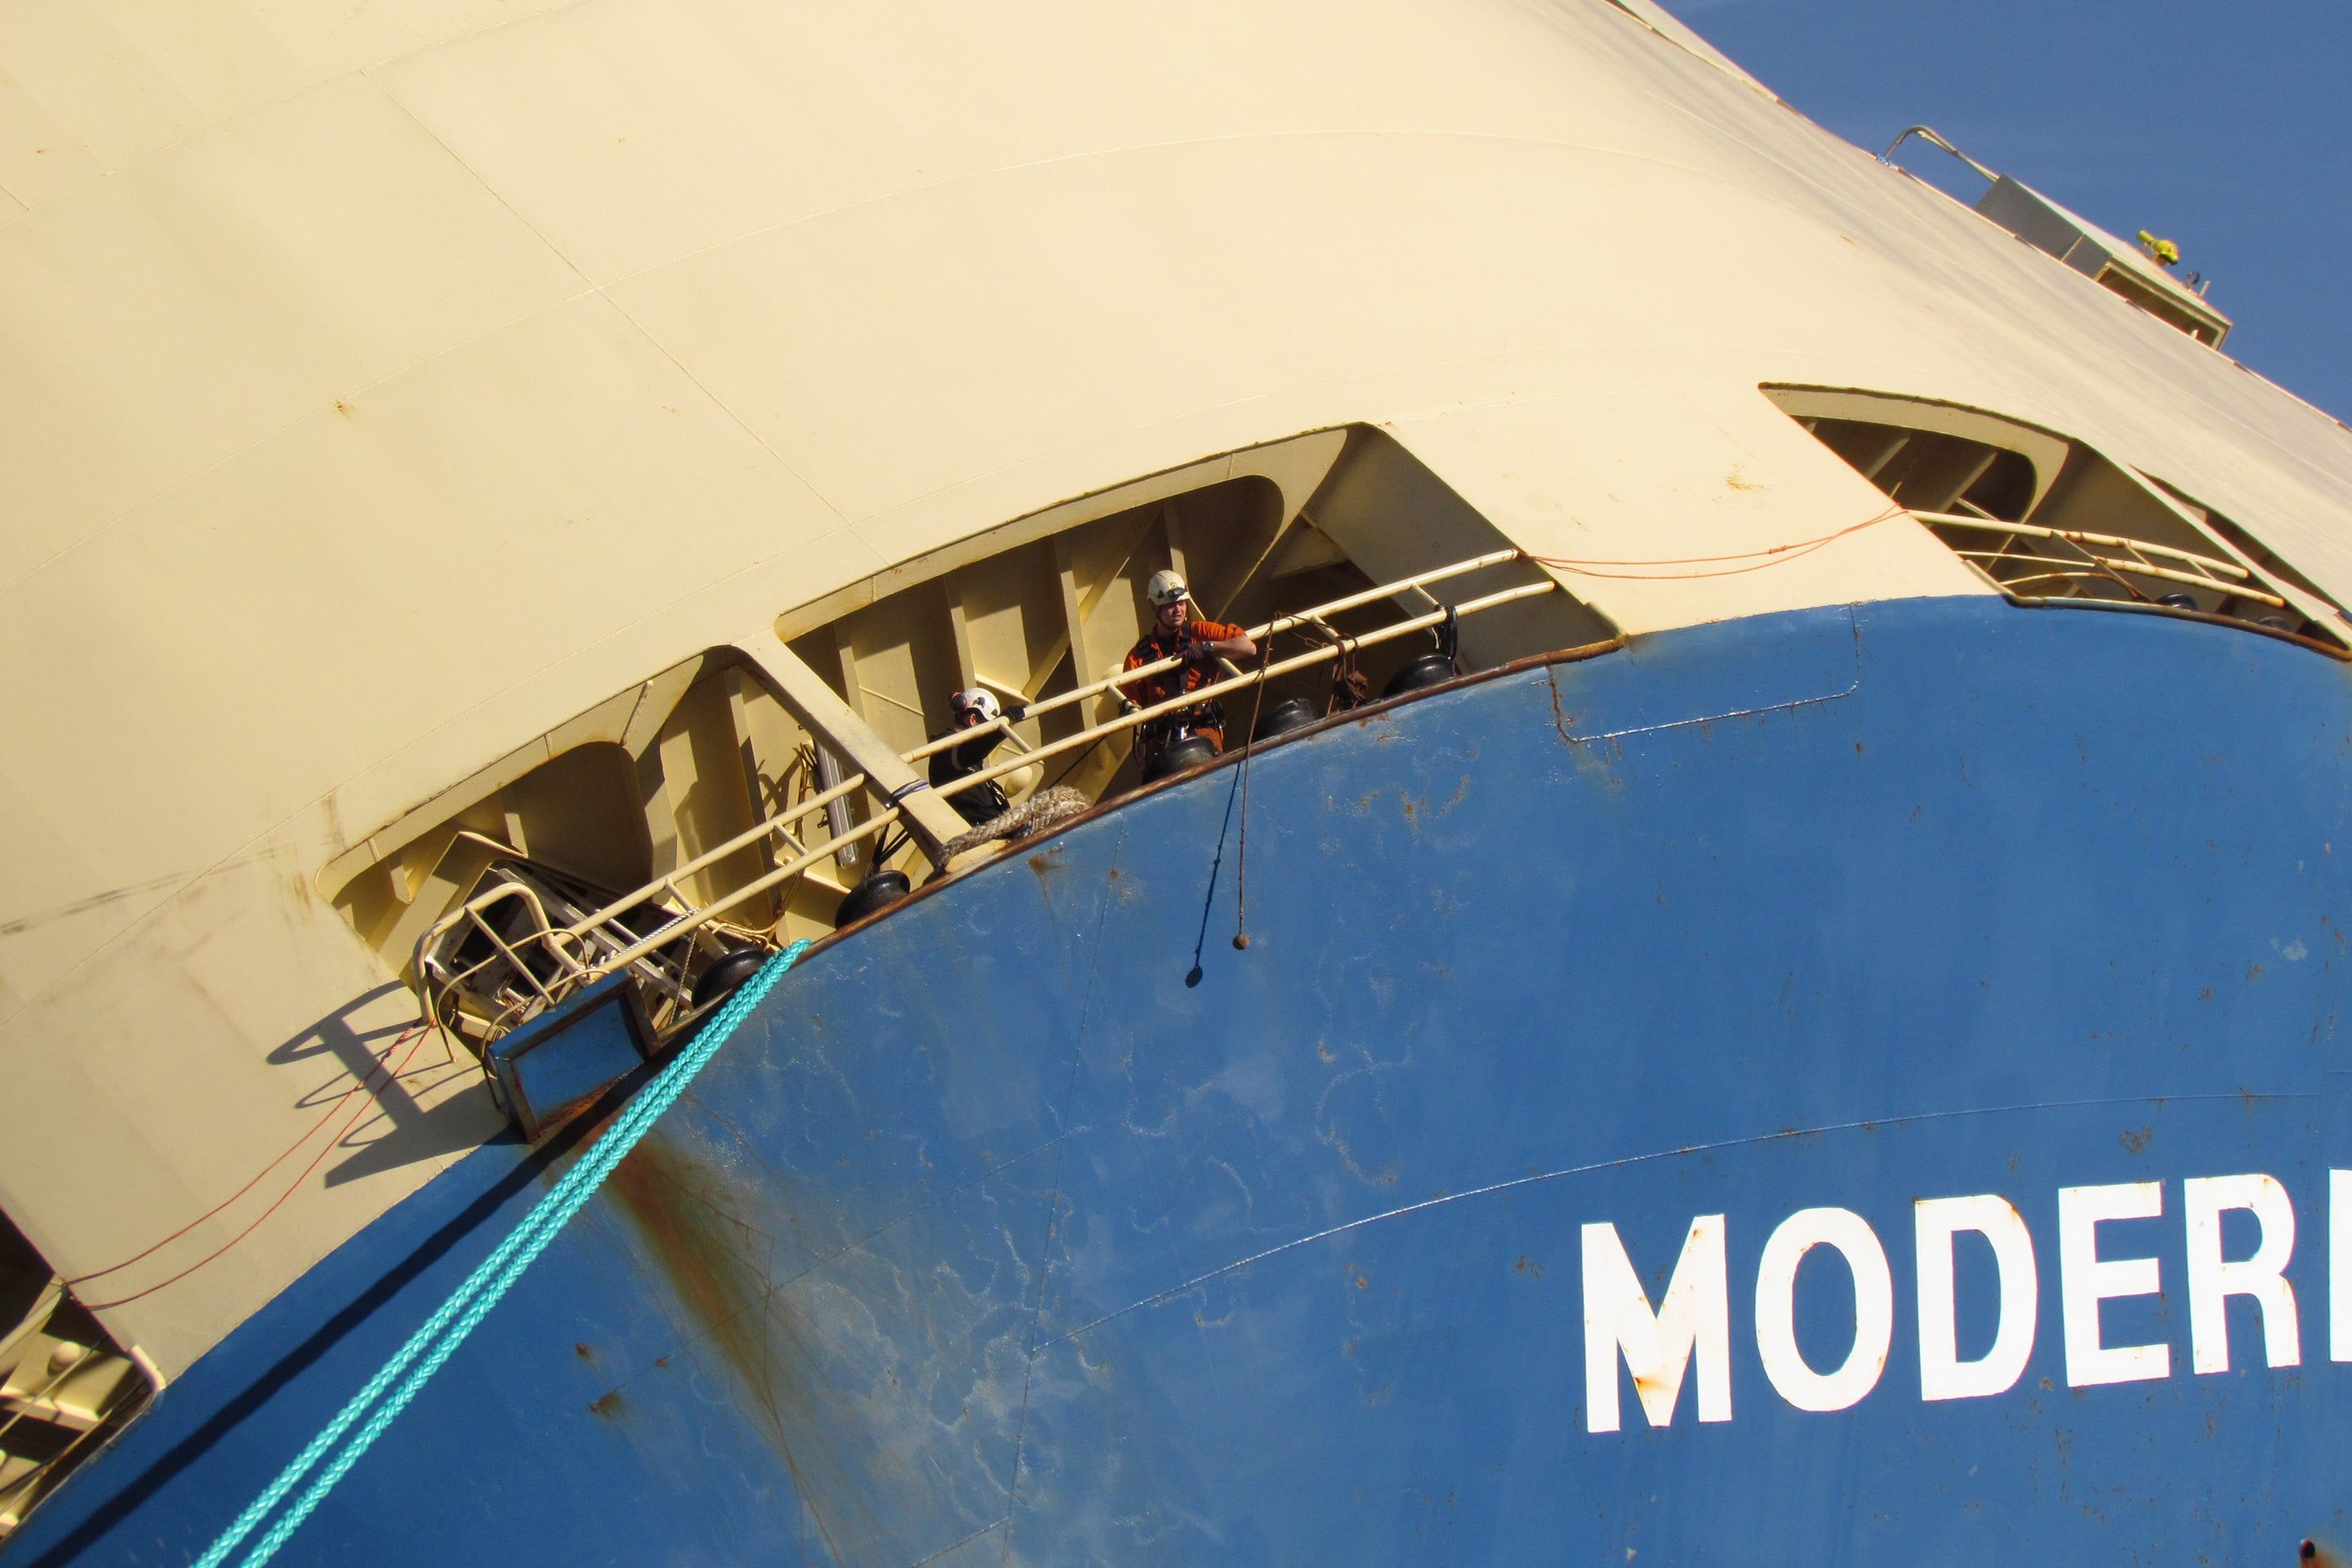 The salvage team on board the Modern Express